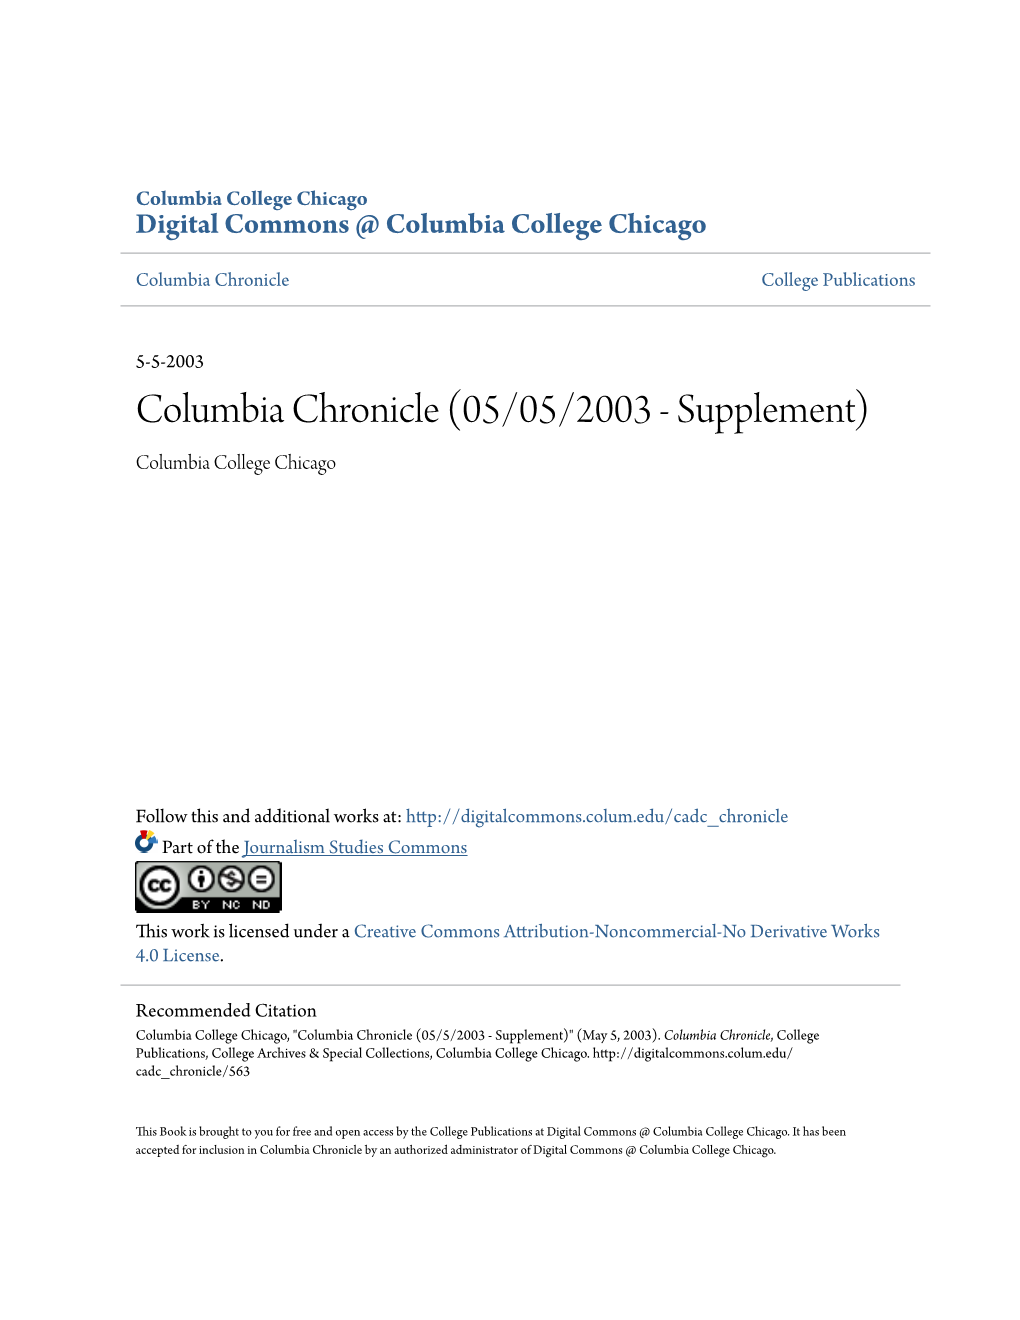 Columbia Chronicle (05/05/2003 - Supplement) Columbia College Chicago